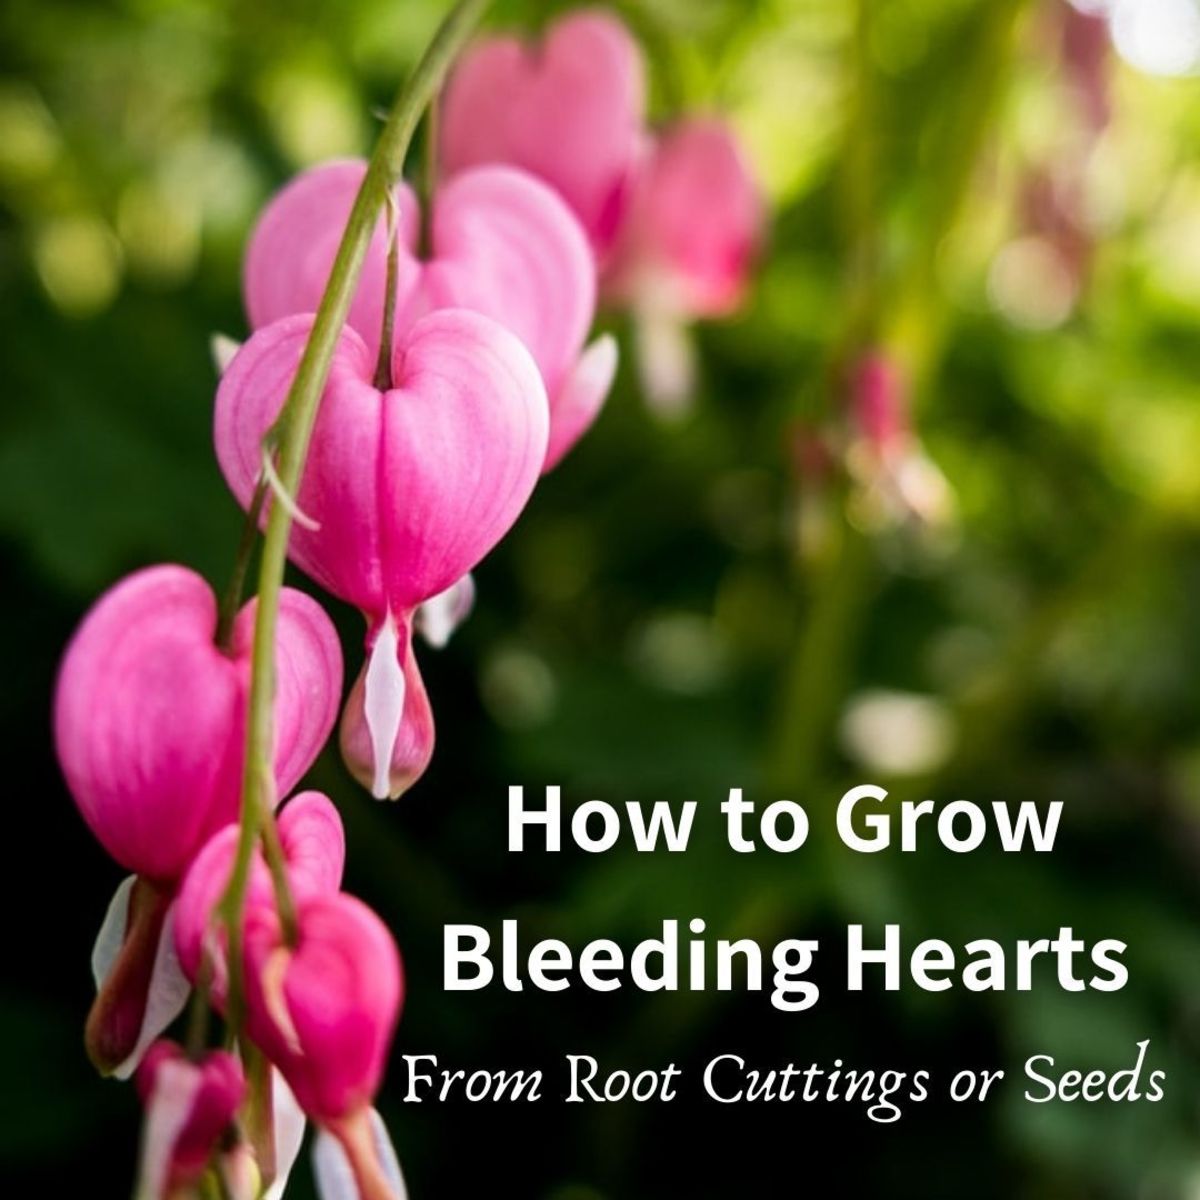 How to Start Bleeding Hearts From Root Cuttings or Seeds